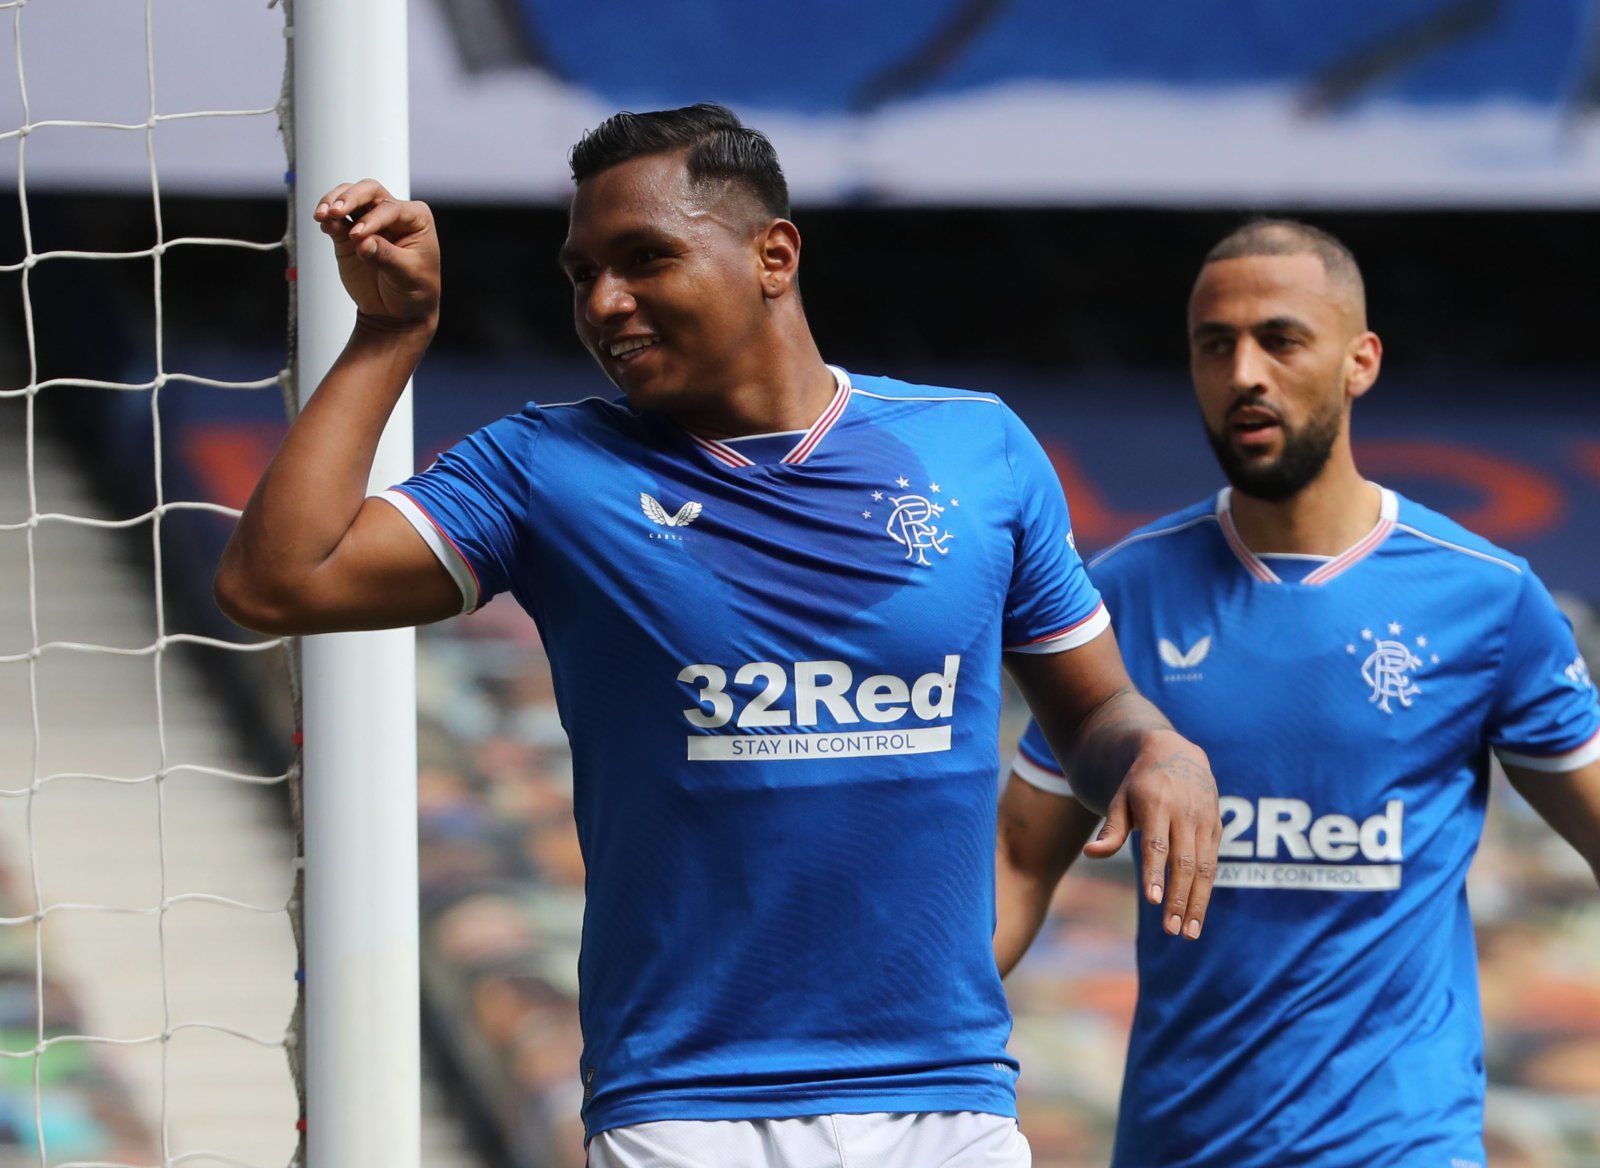 Rangers: Frank McAvennie says Alfredo Morelos’ starting place is in danger -Rangers News